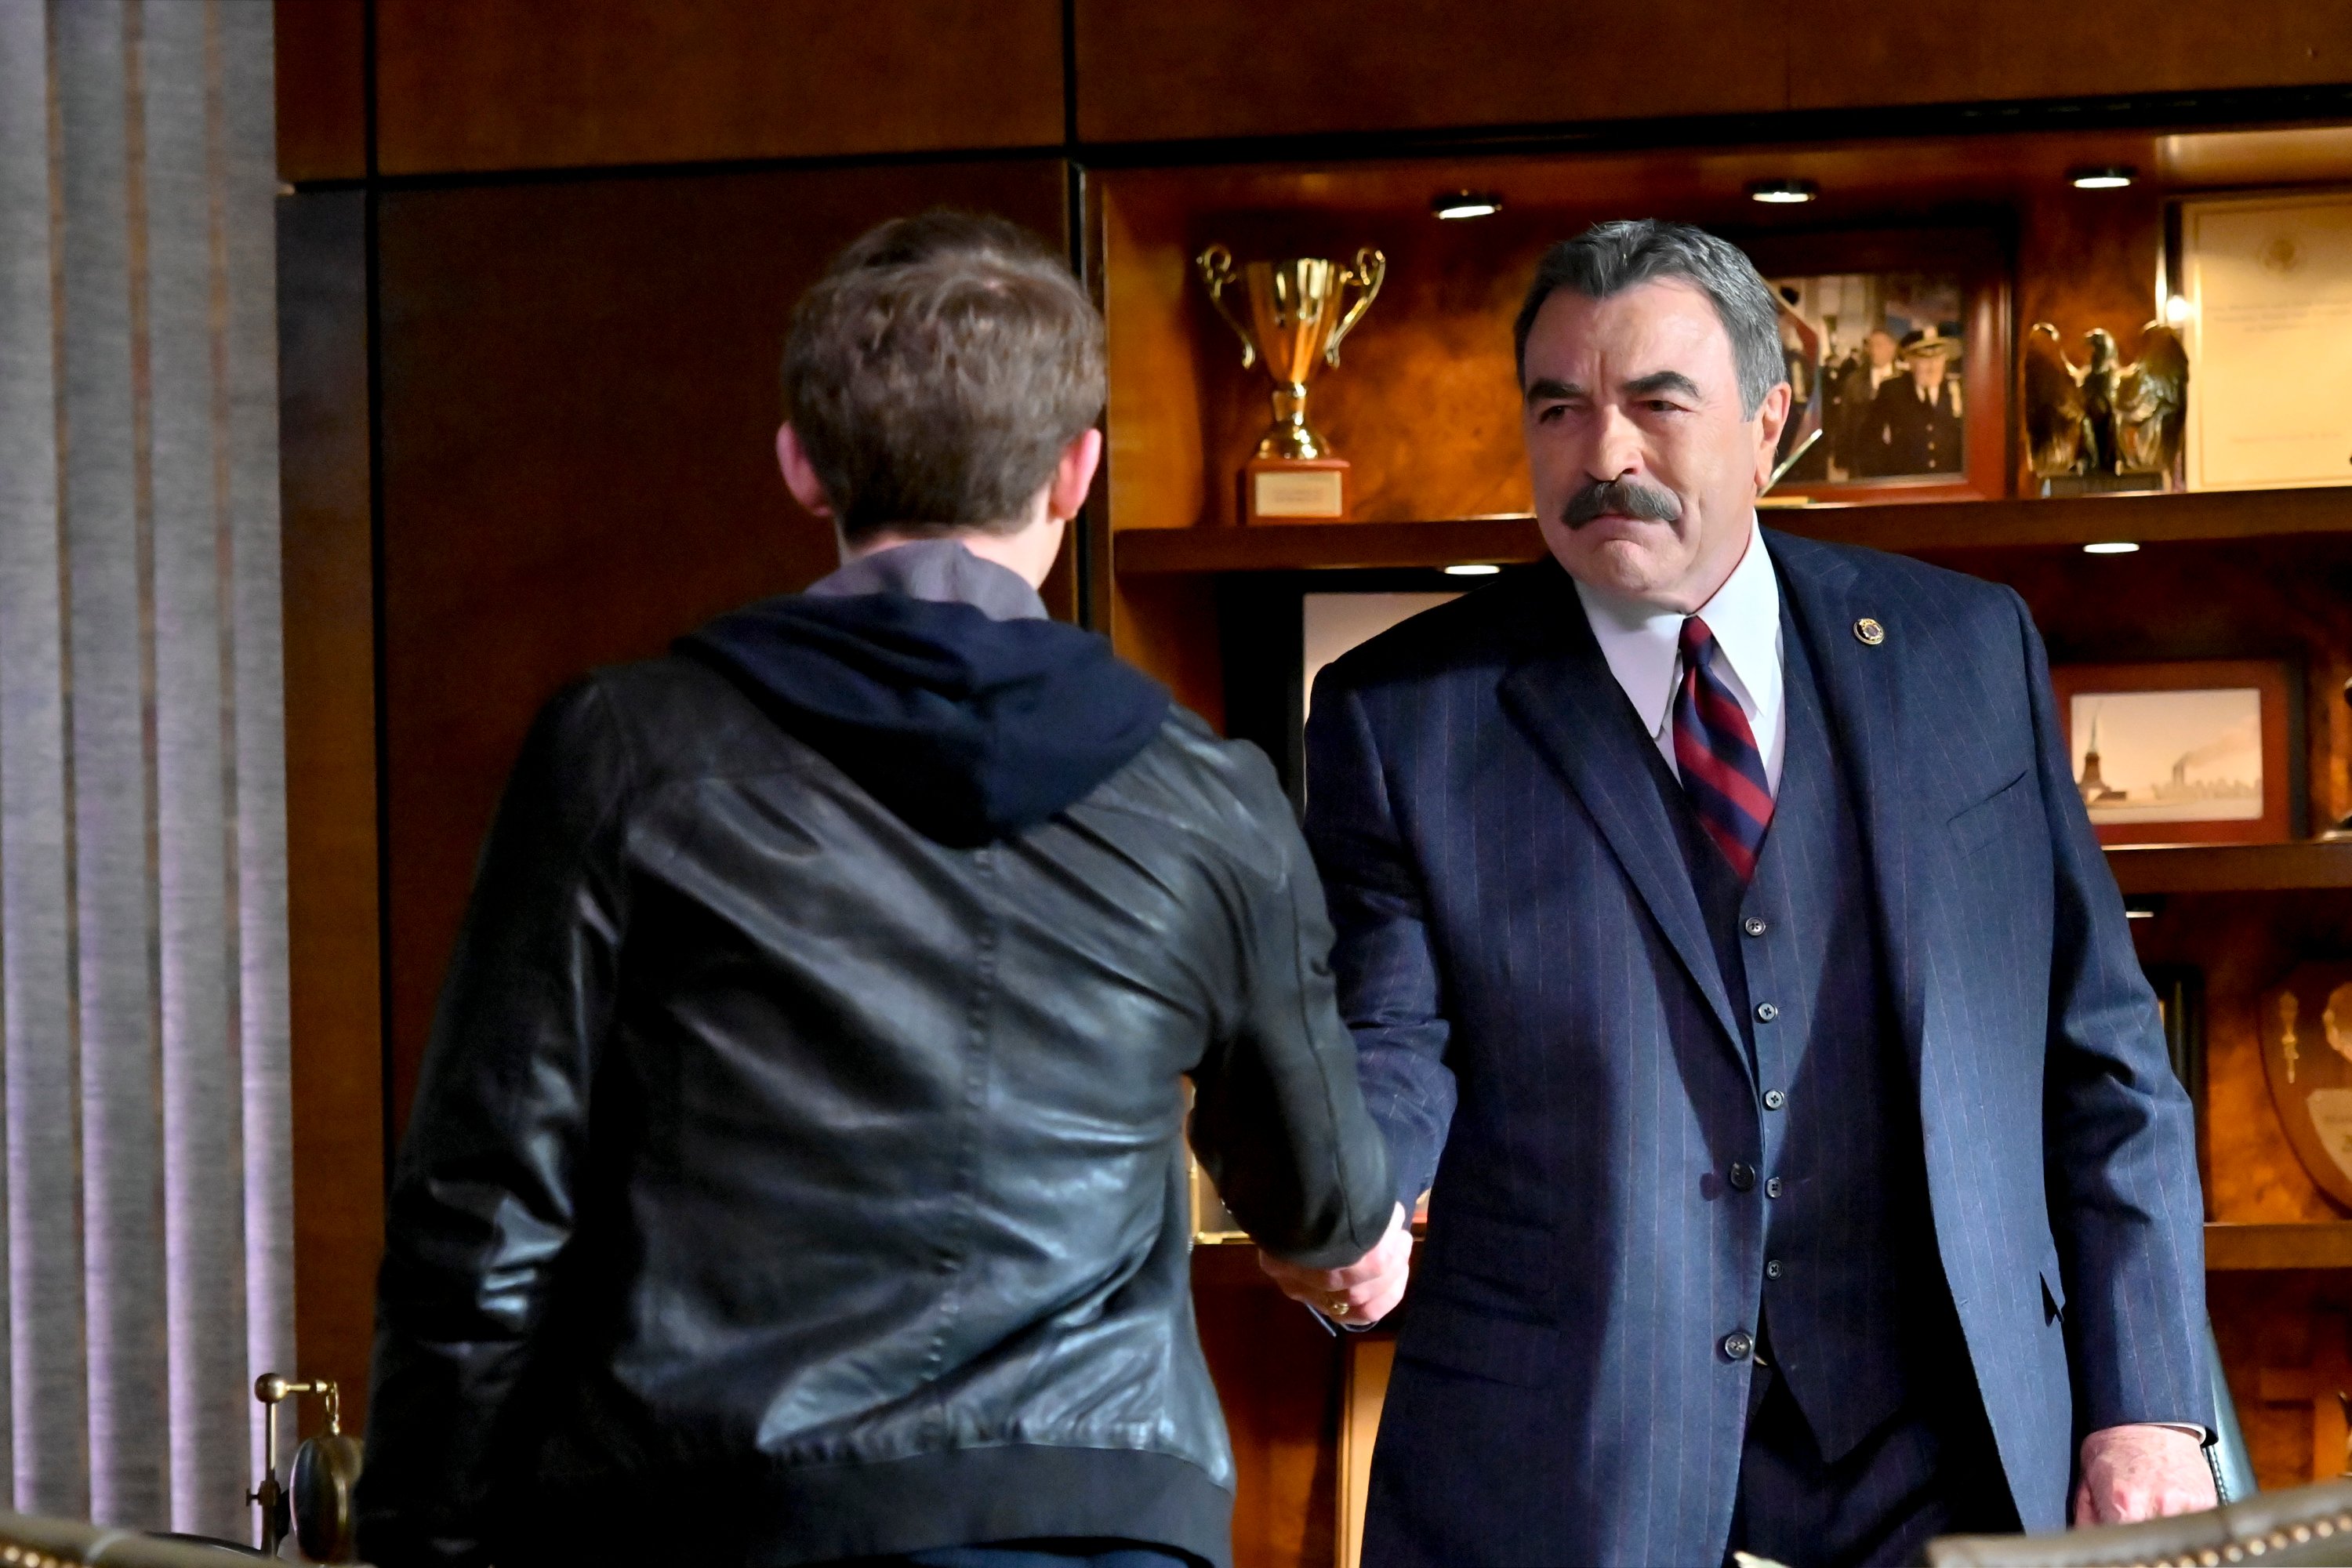 Will Hochman and Tom Selleck on the set of 'Blue Bloods' |  John Paul Filo/CBS via Getty Images